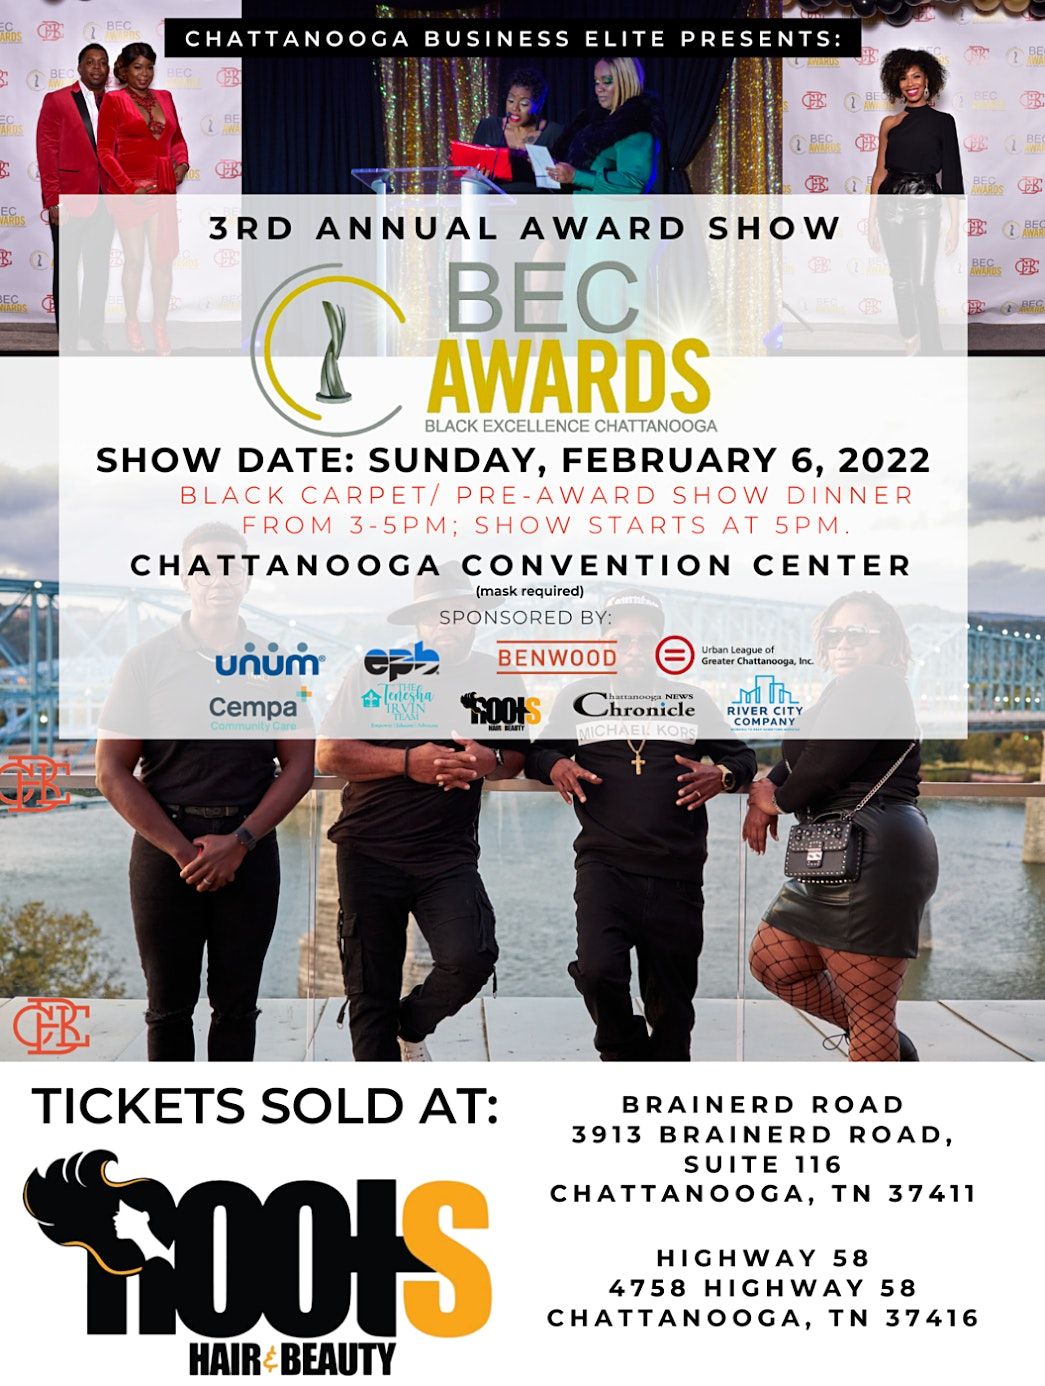 3rd Annual Black Excellence Chattanooga (BEC) Awards 2022, Chattanooga